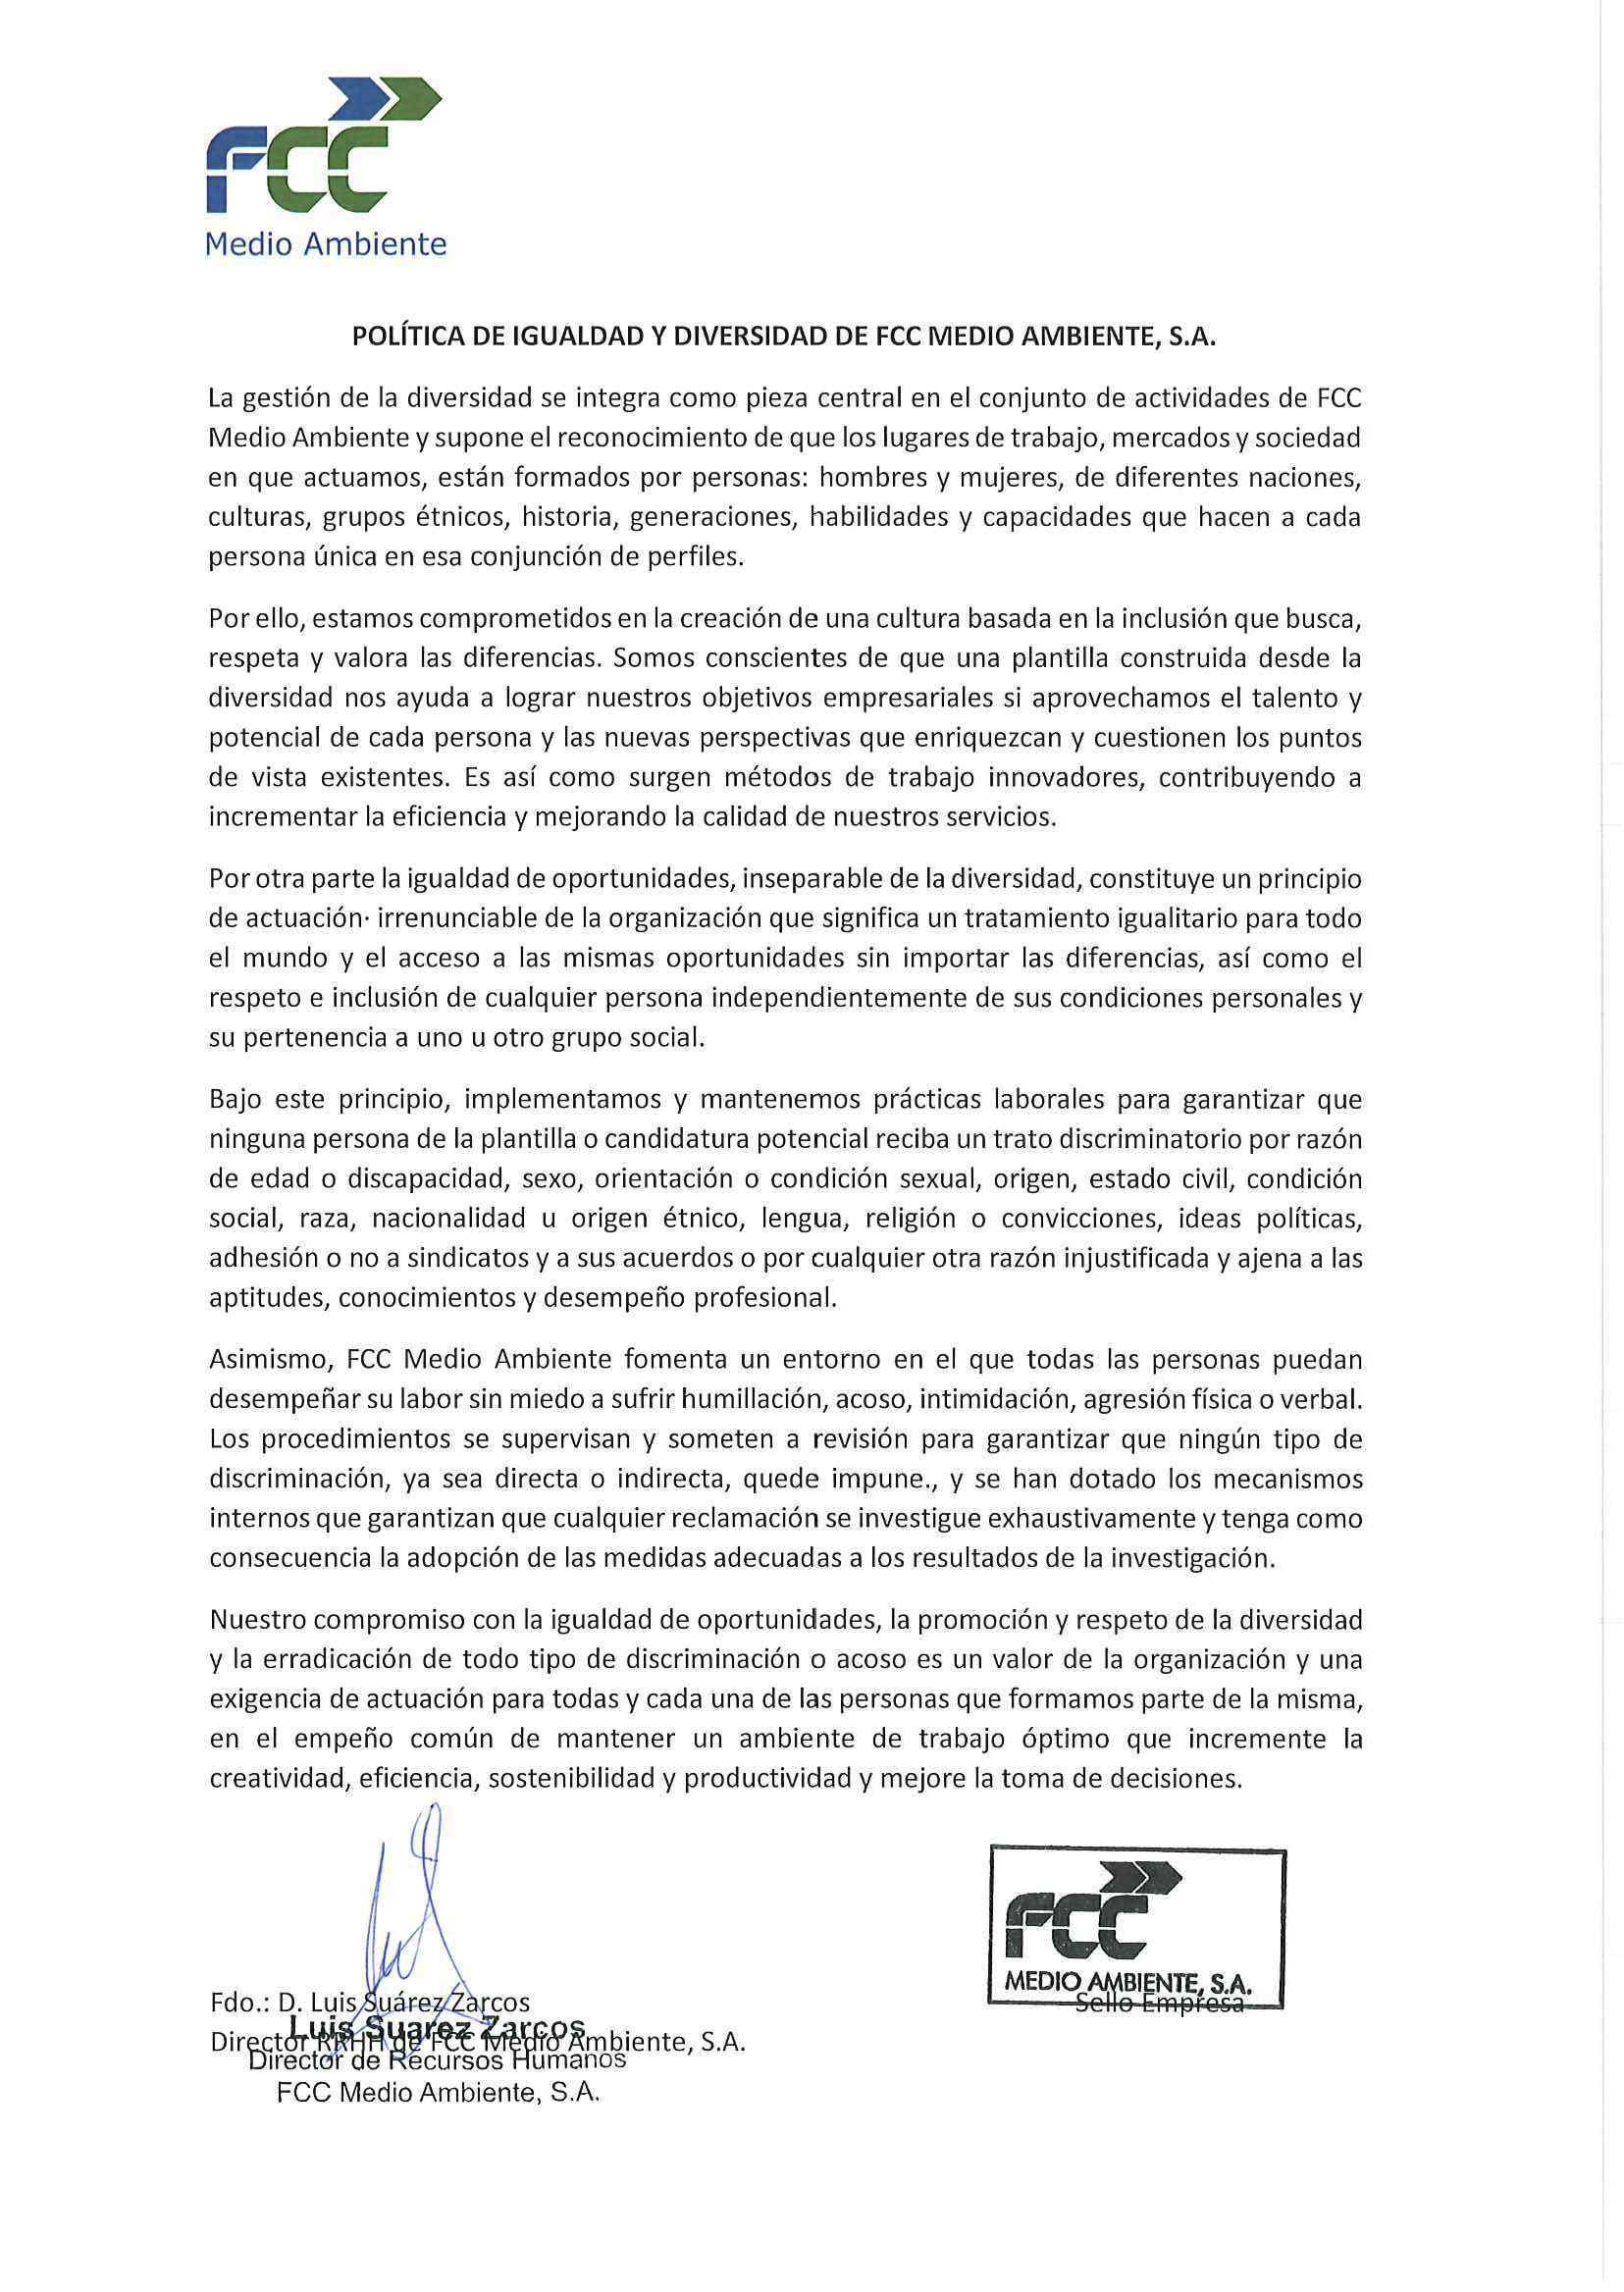 Equality and Diversity Policy of FCC Medio Ambiente